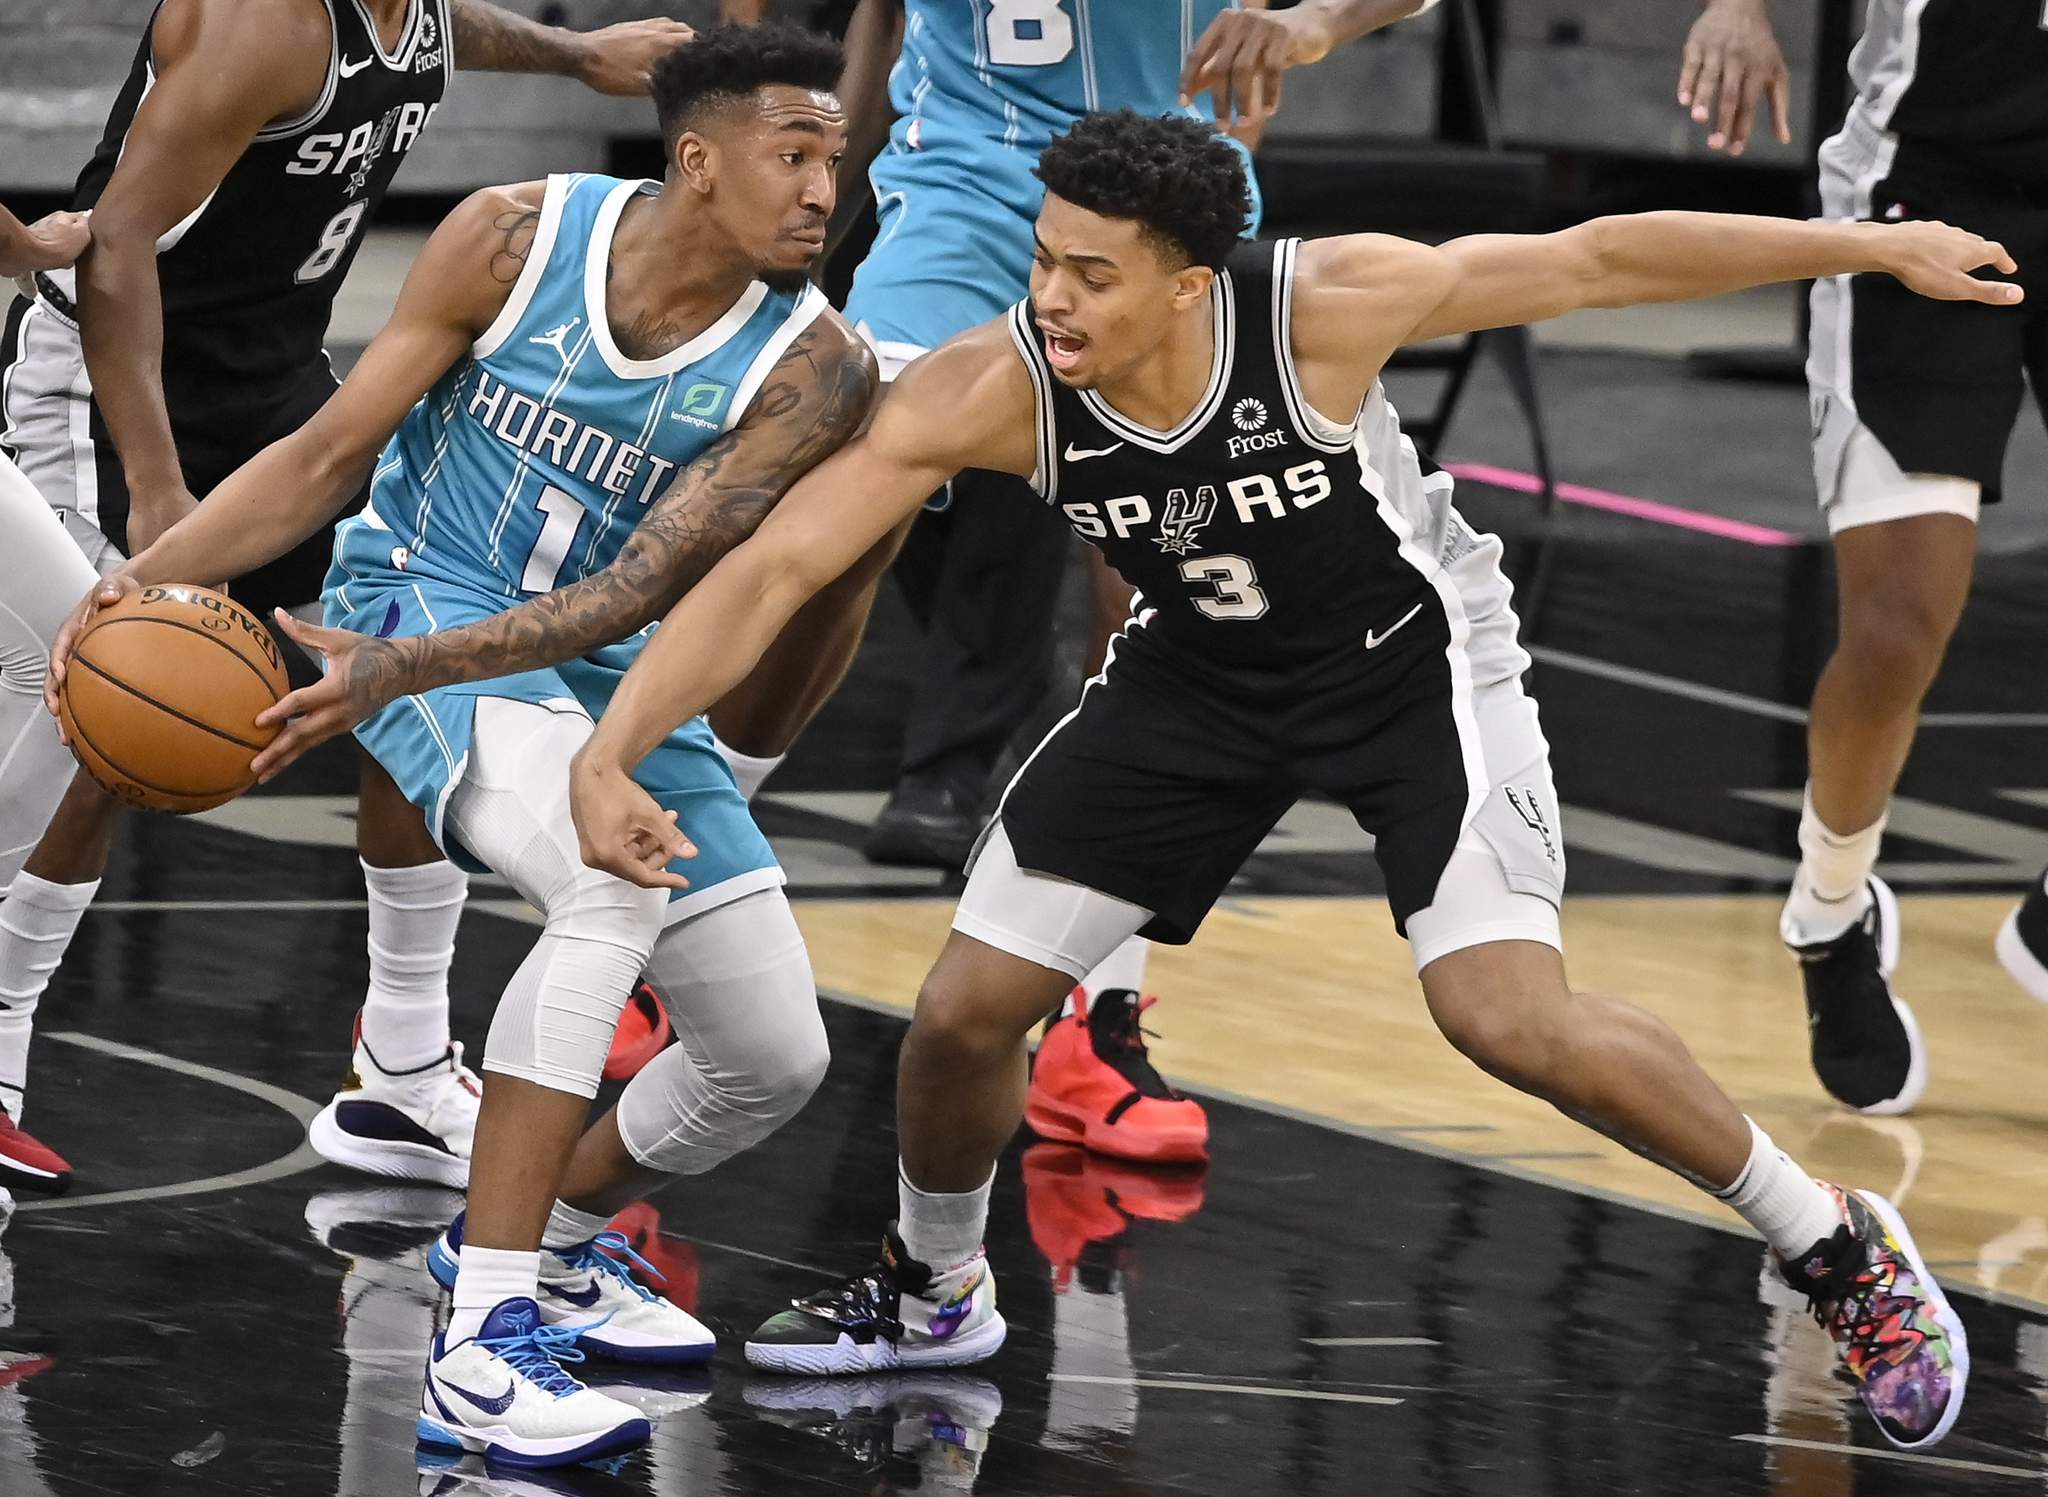 Hornets top Spurs 100-97 in first game since Ball’s injury